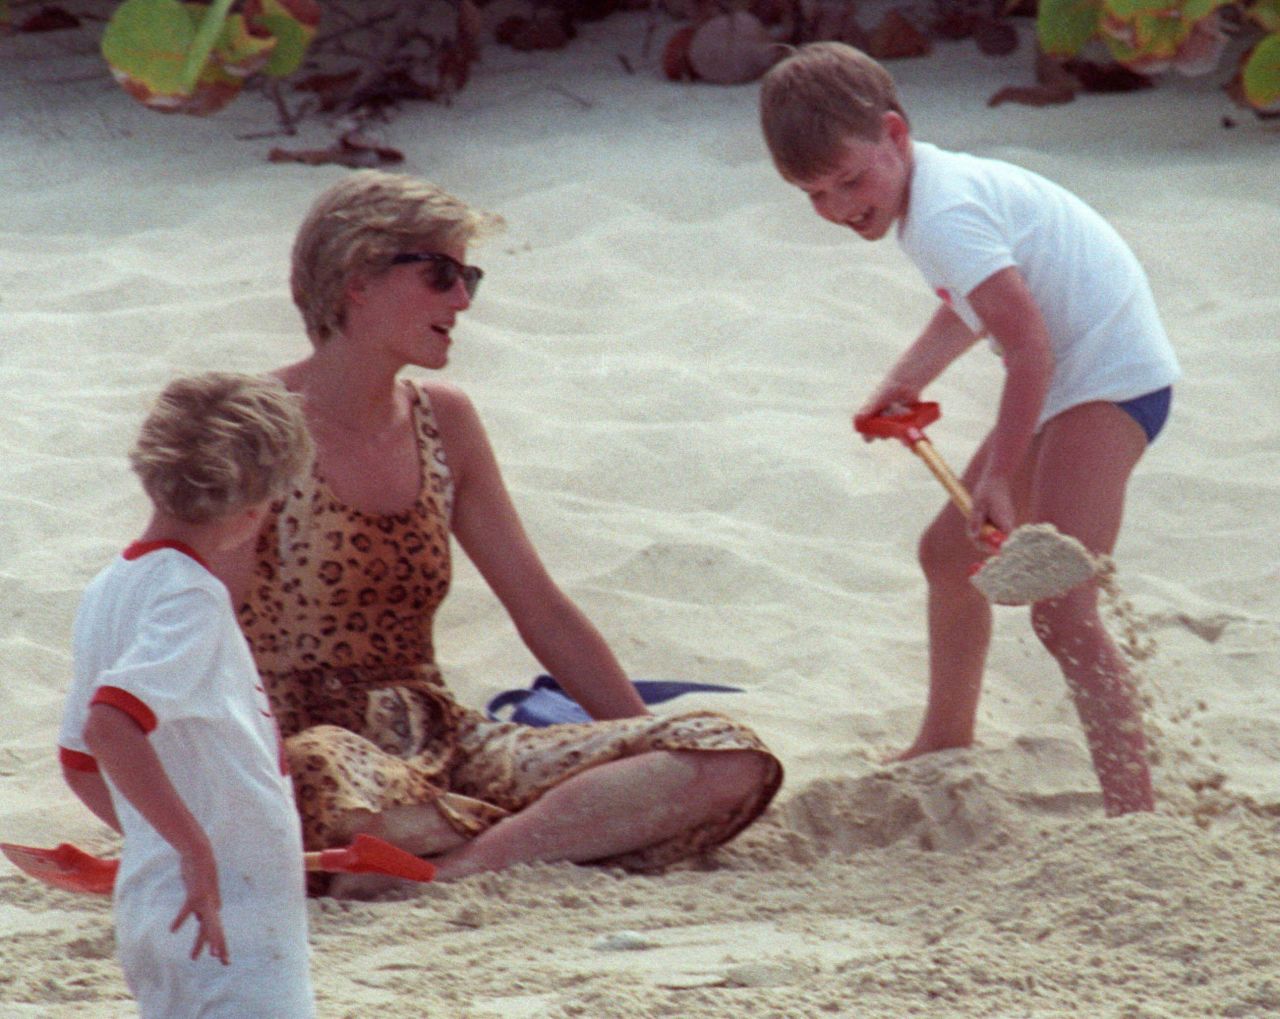 William shovels sand onto his mother while playing on a beach in 1990.